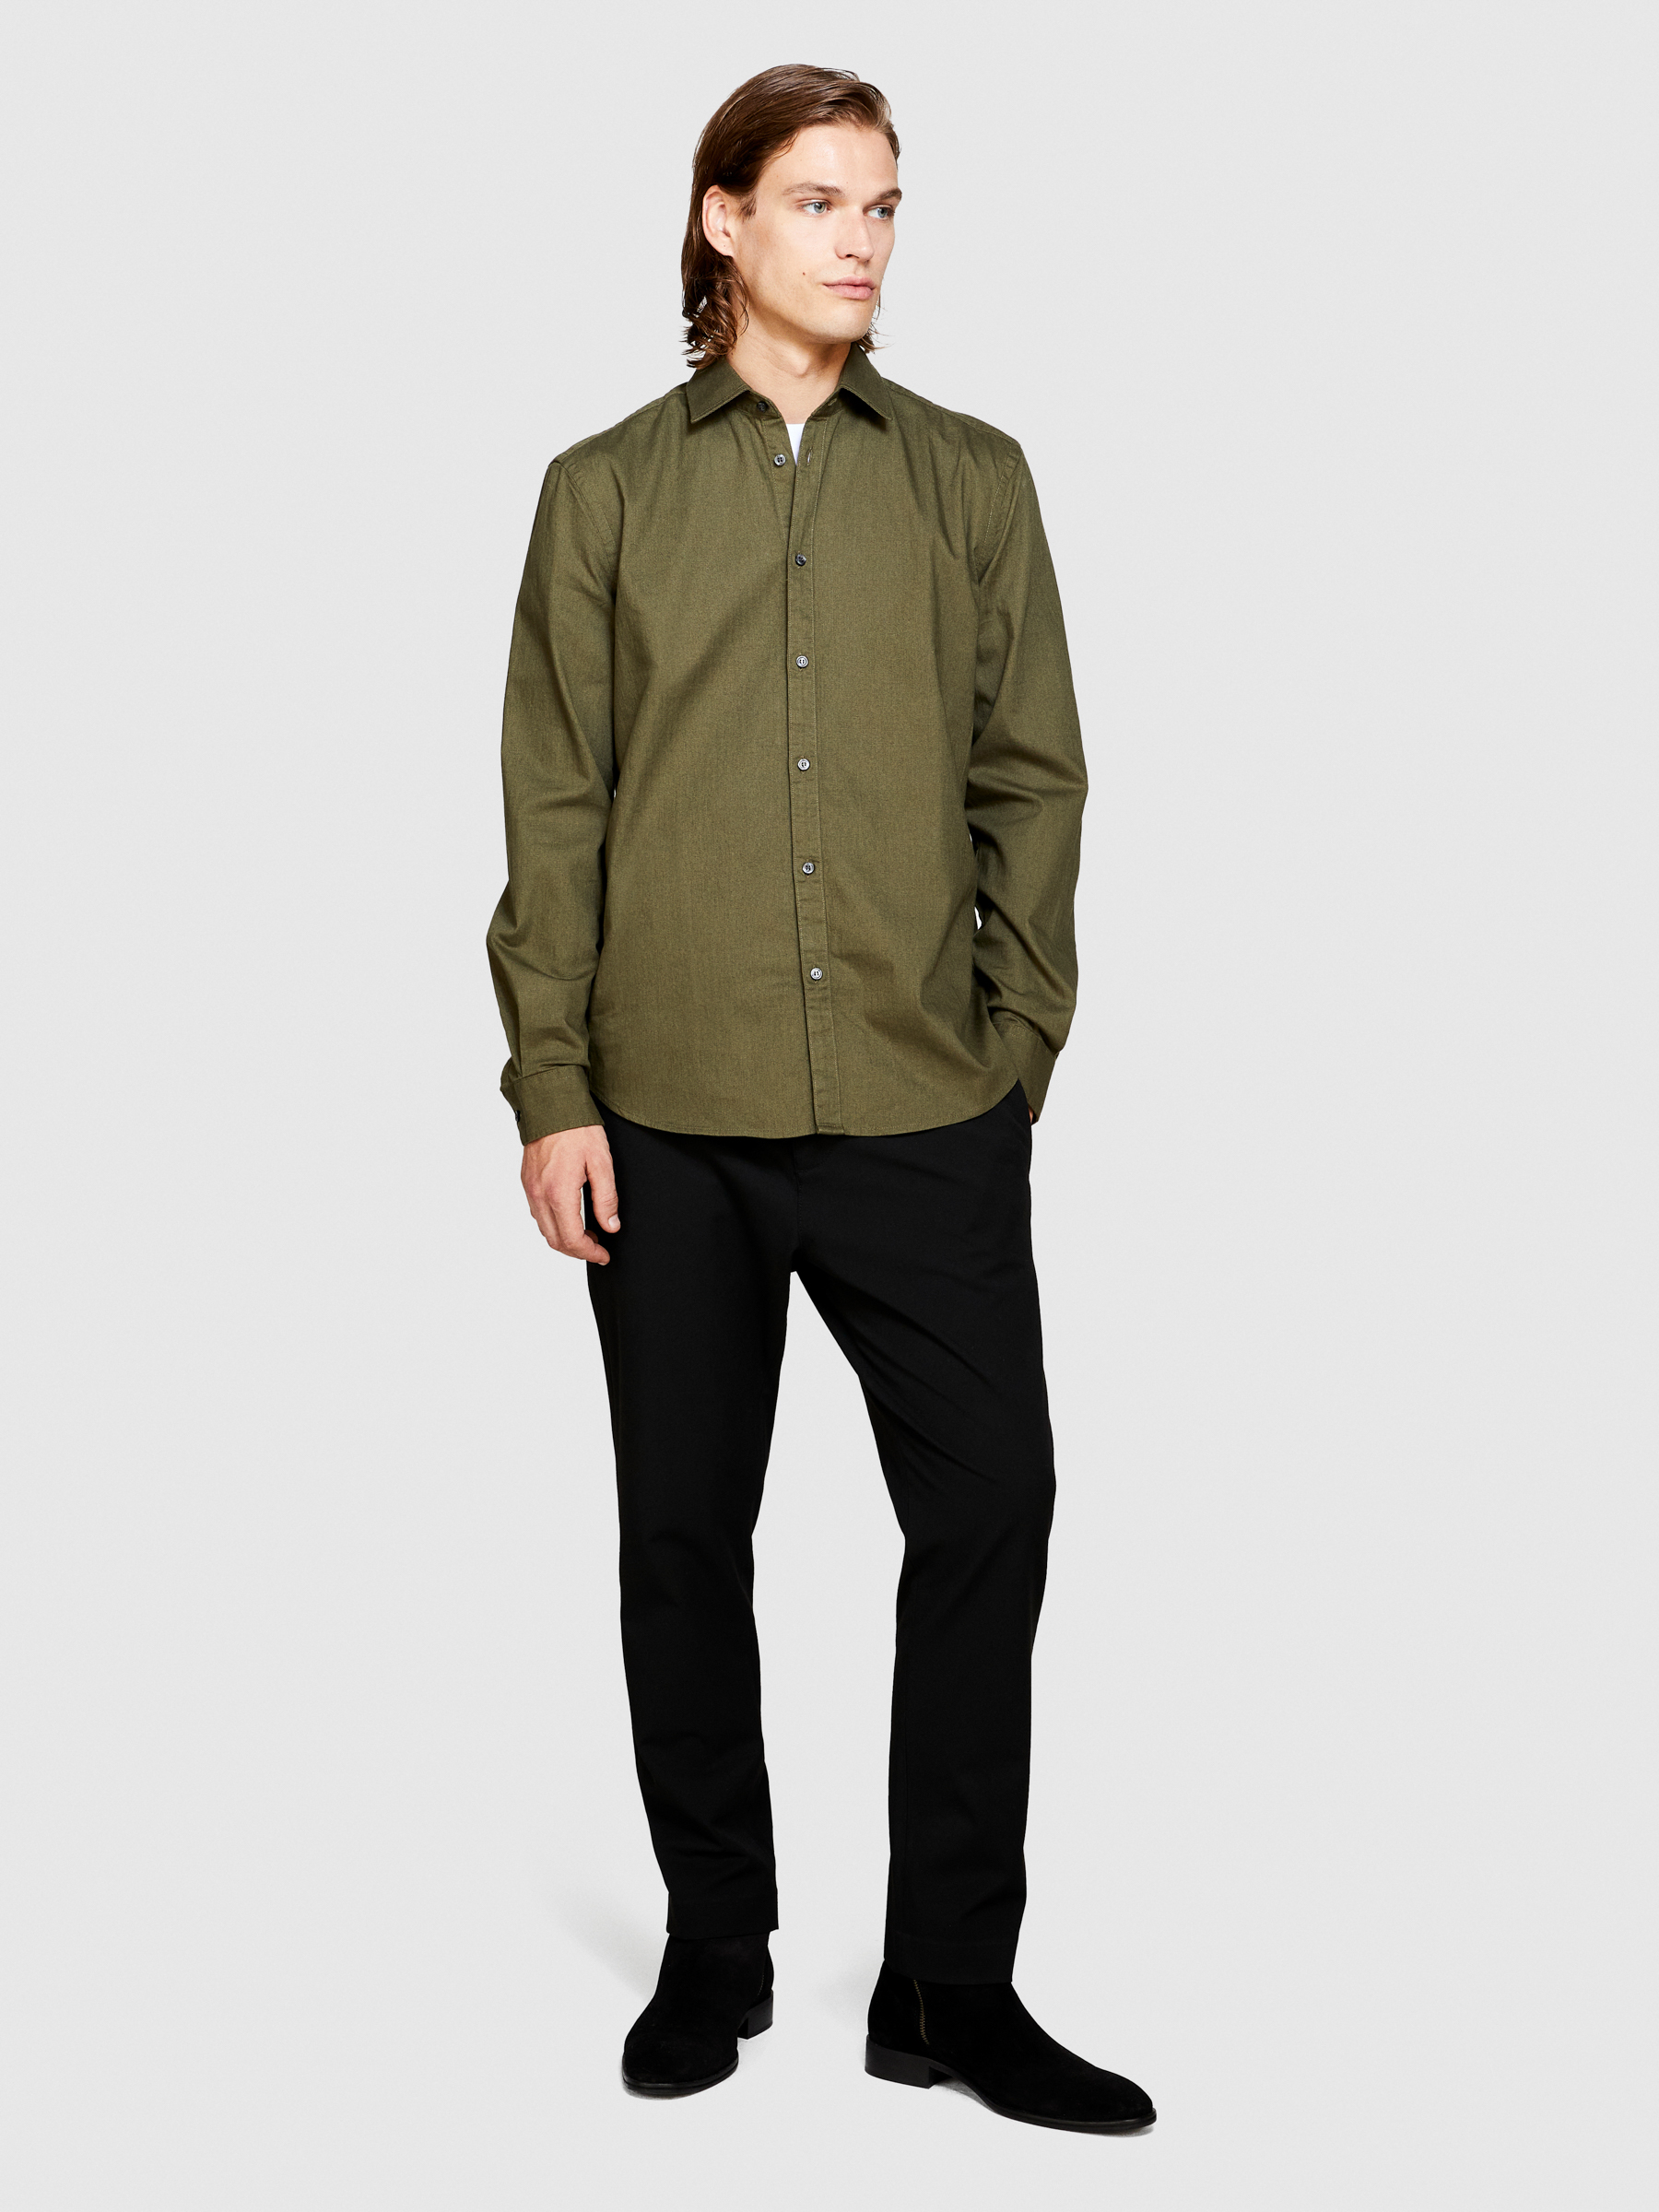 Sisley - Solid Colored Shirt, Man, Military Green, Size: 43